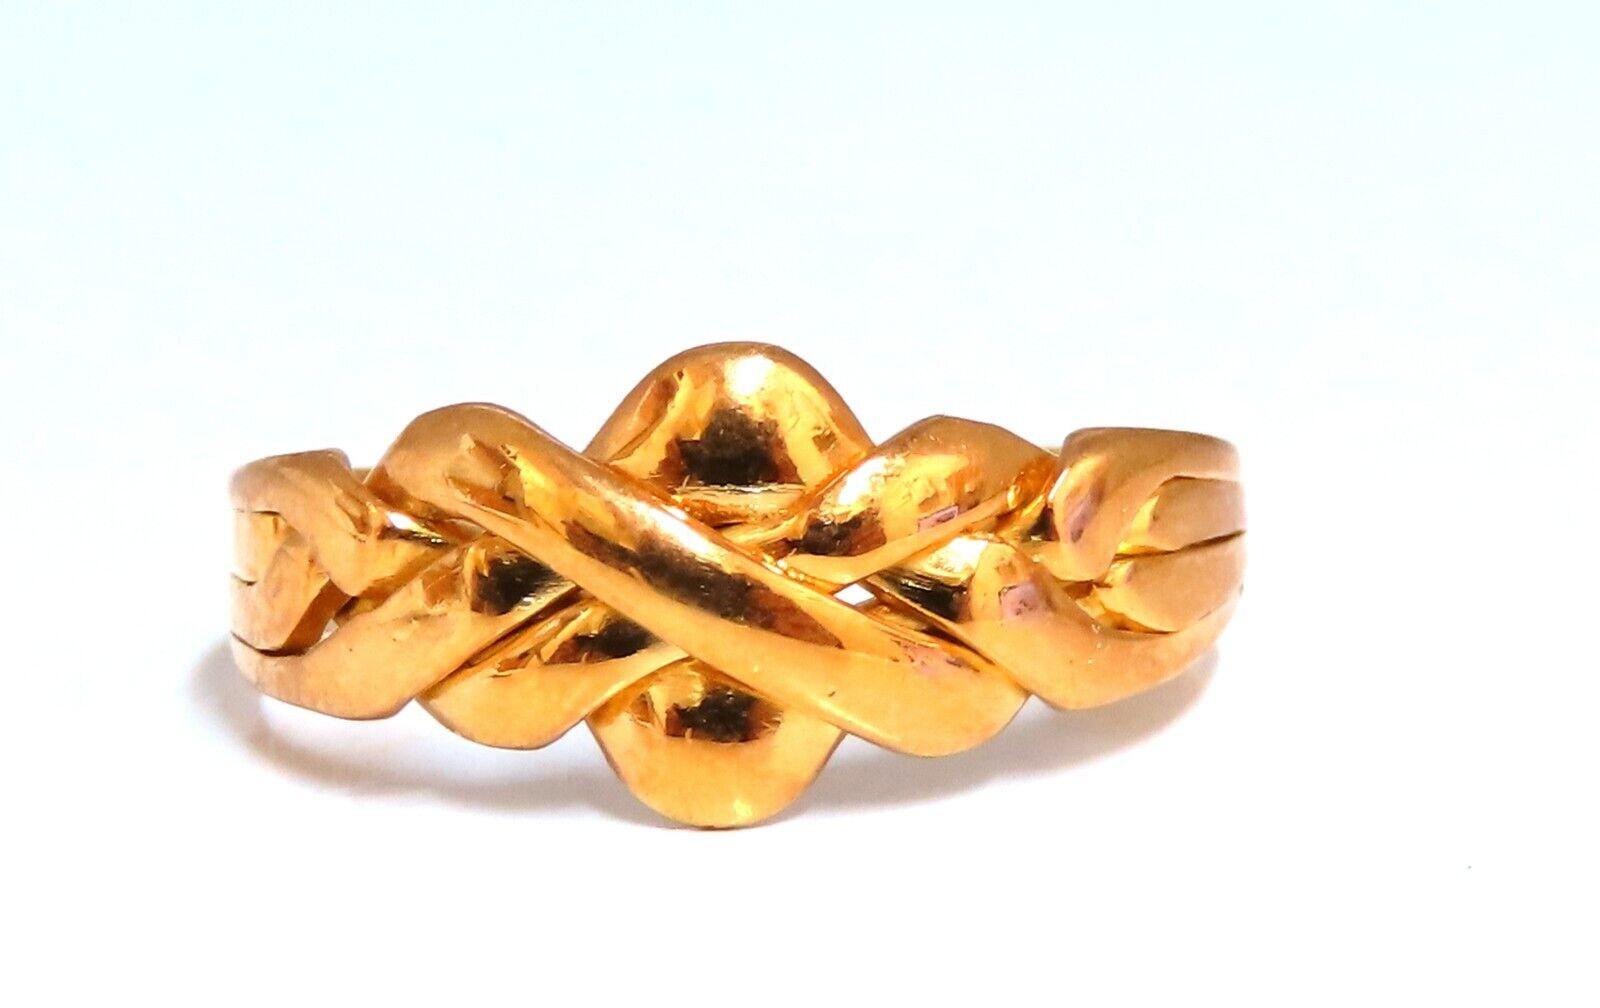 18k gold puzzle ring